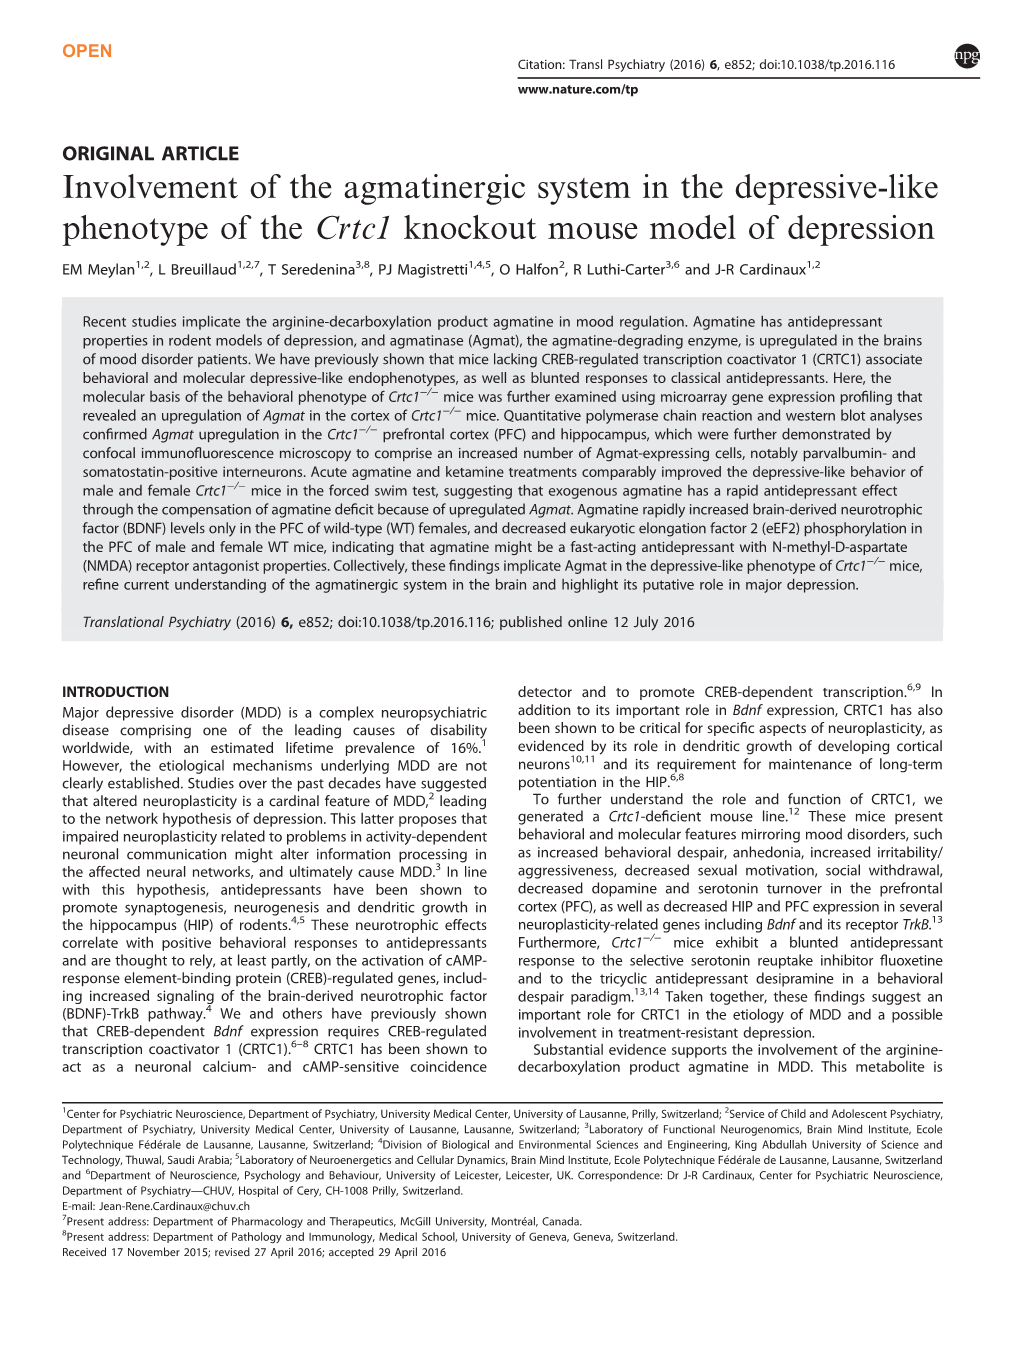 Involvement of the Agmatinergic System in the Depressive-Like Phenotype of the Crtc1 Knockout Mouse Model of Depression